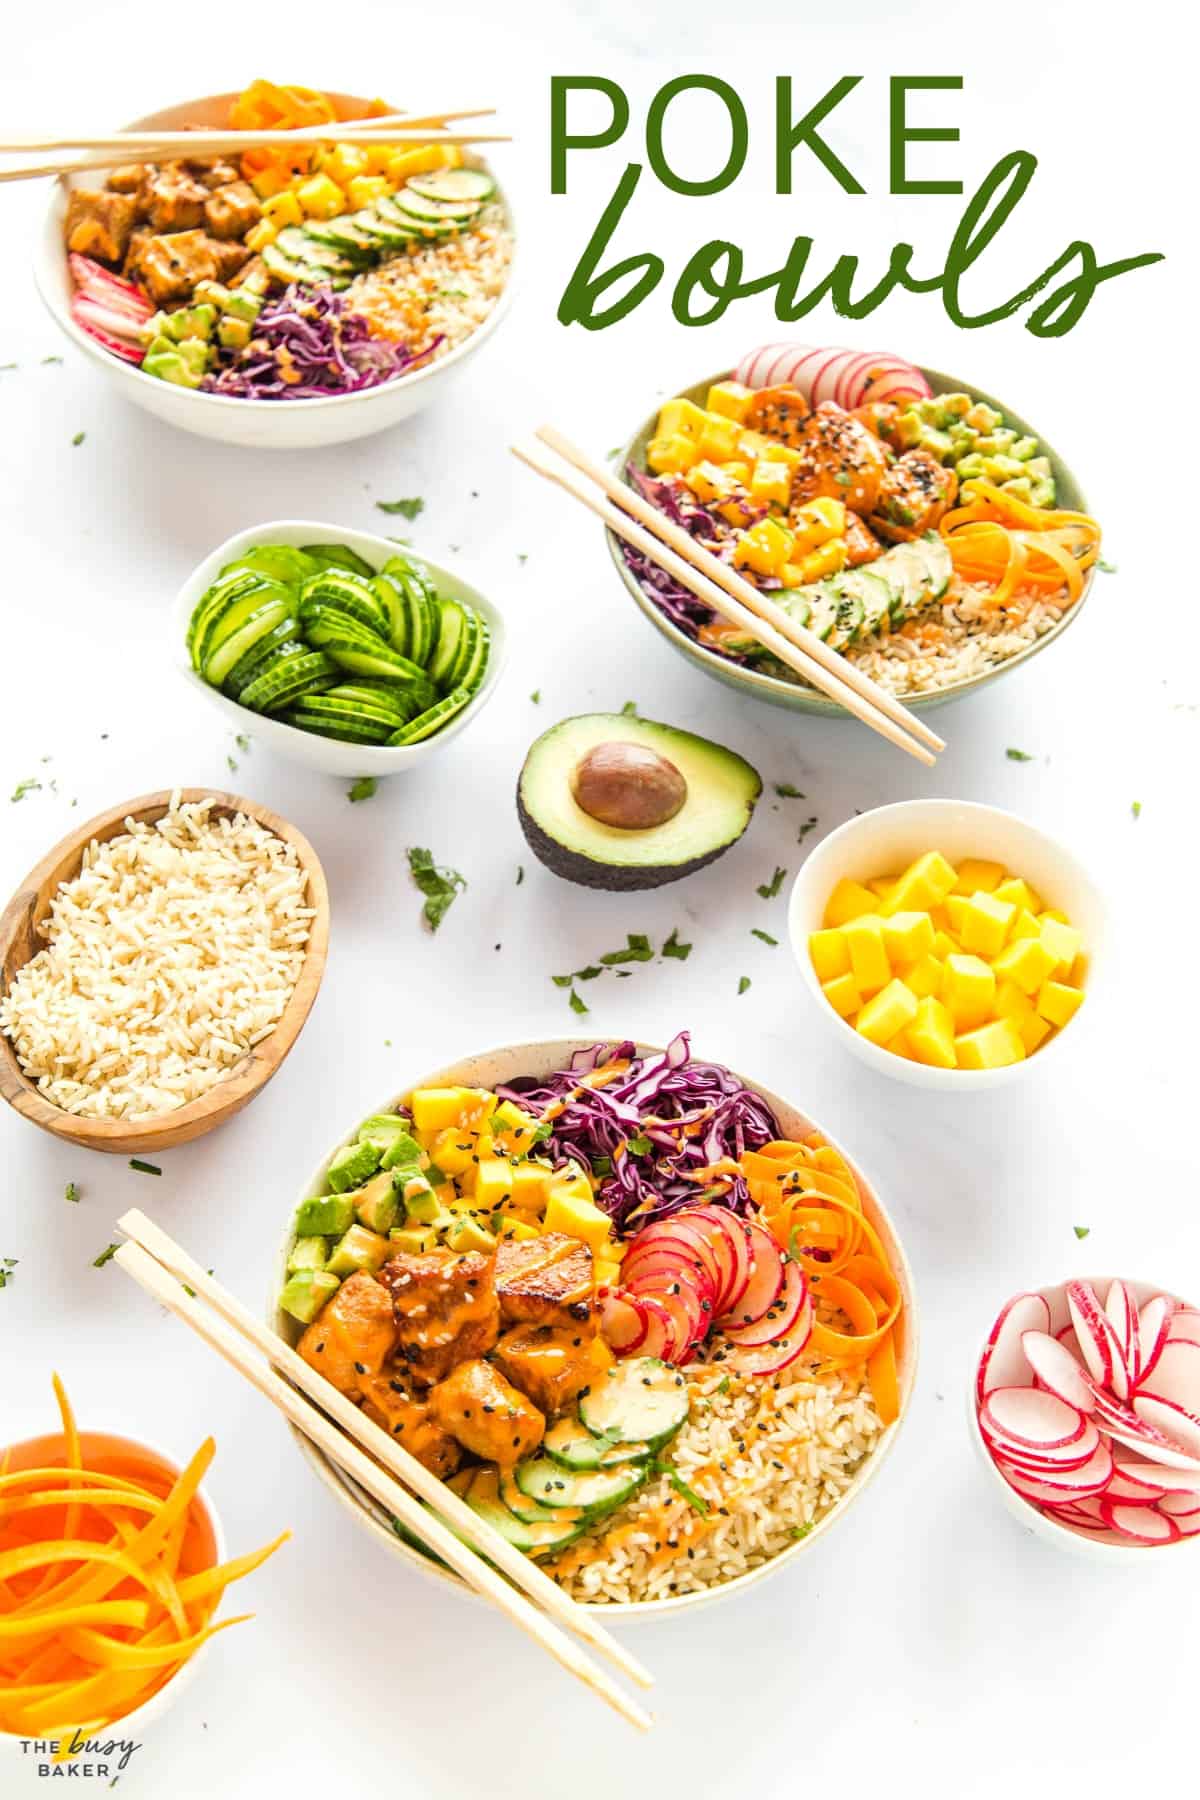 This Poke Bowl Recipe is the perfect fresh and healthy meal! A twist on the Hawaiian classic, made with veggies, crispy salmon or tofu, & brown rice - perfect for meal prep! Recipe from thebusybaker.ca! #pokebowl #pokebowls #hawaiianpokebowl #easypokebowl #veganpokebowl #pokebowlrecipe #howtomakepokebowls #healthy #fresh #plantbased #grainfree #health via @busybakerblog